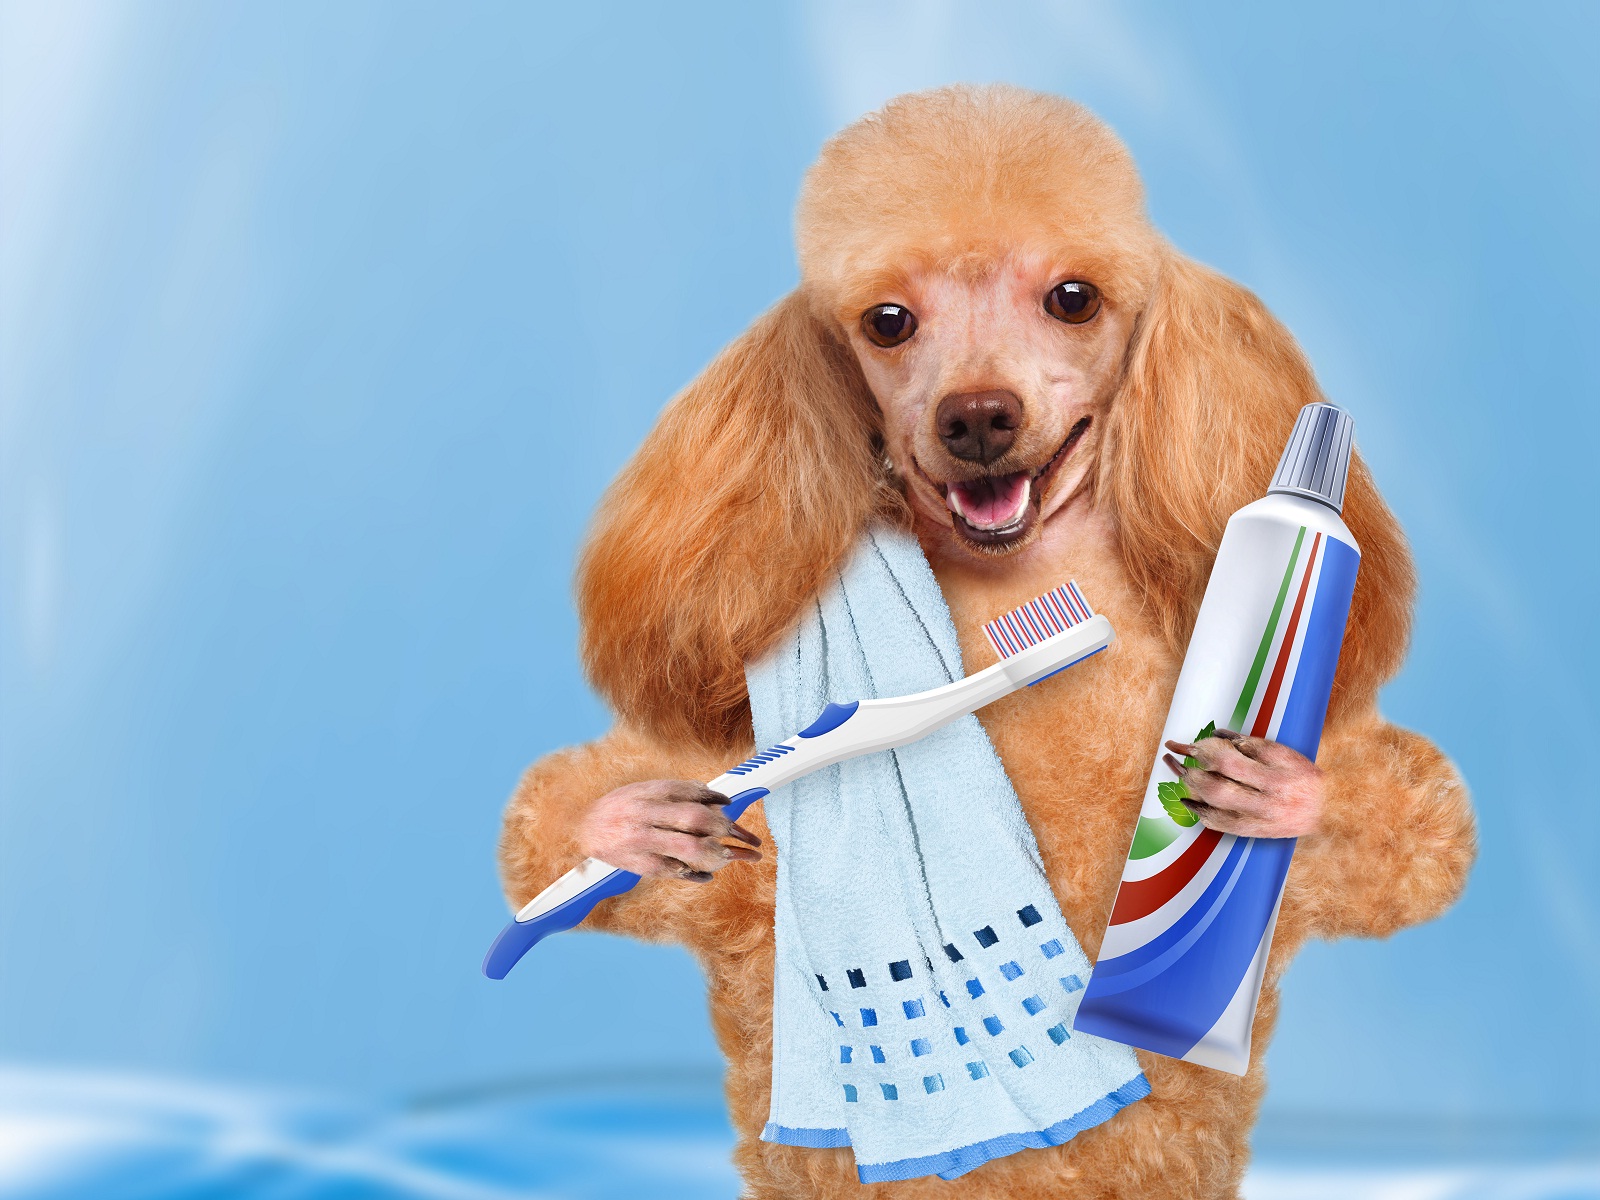 Funny Good Morning Wallpaper Group - Dog Brushing Its Teeth , HD Wallpaper & Backgrounds